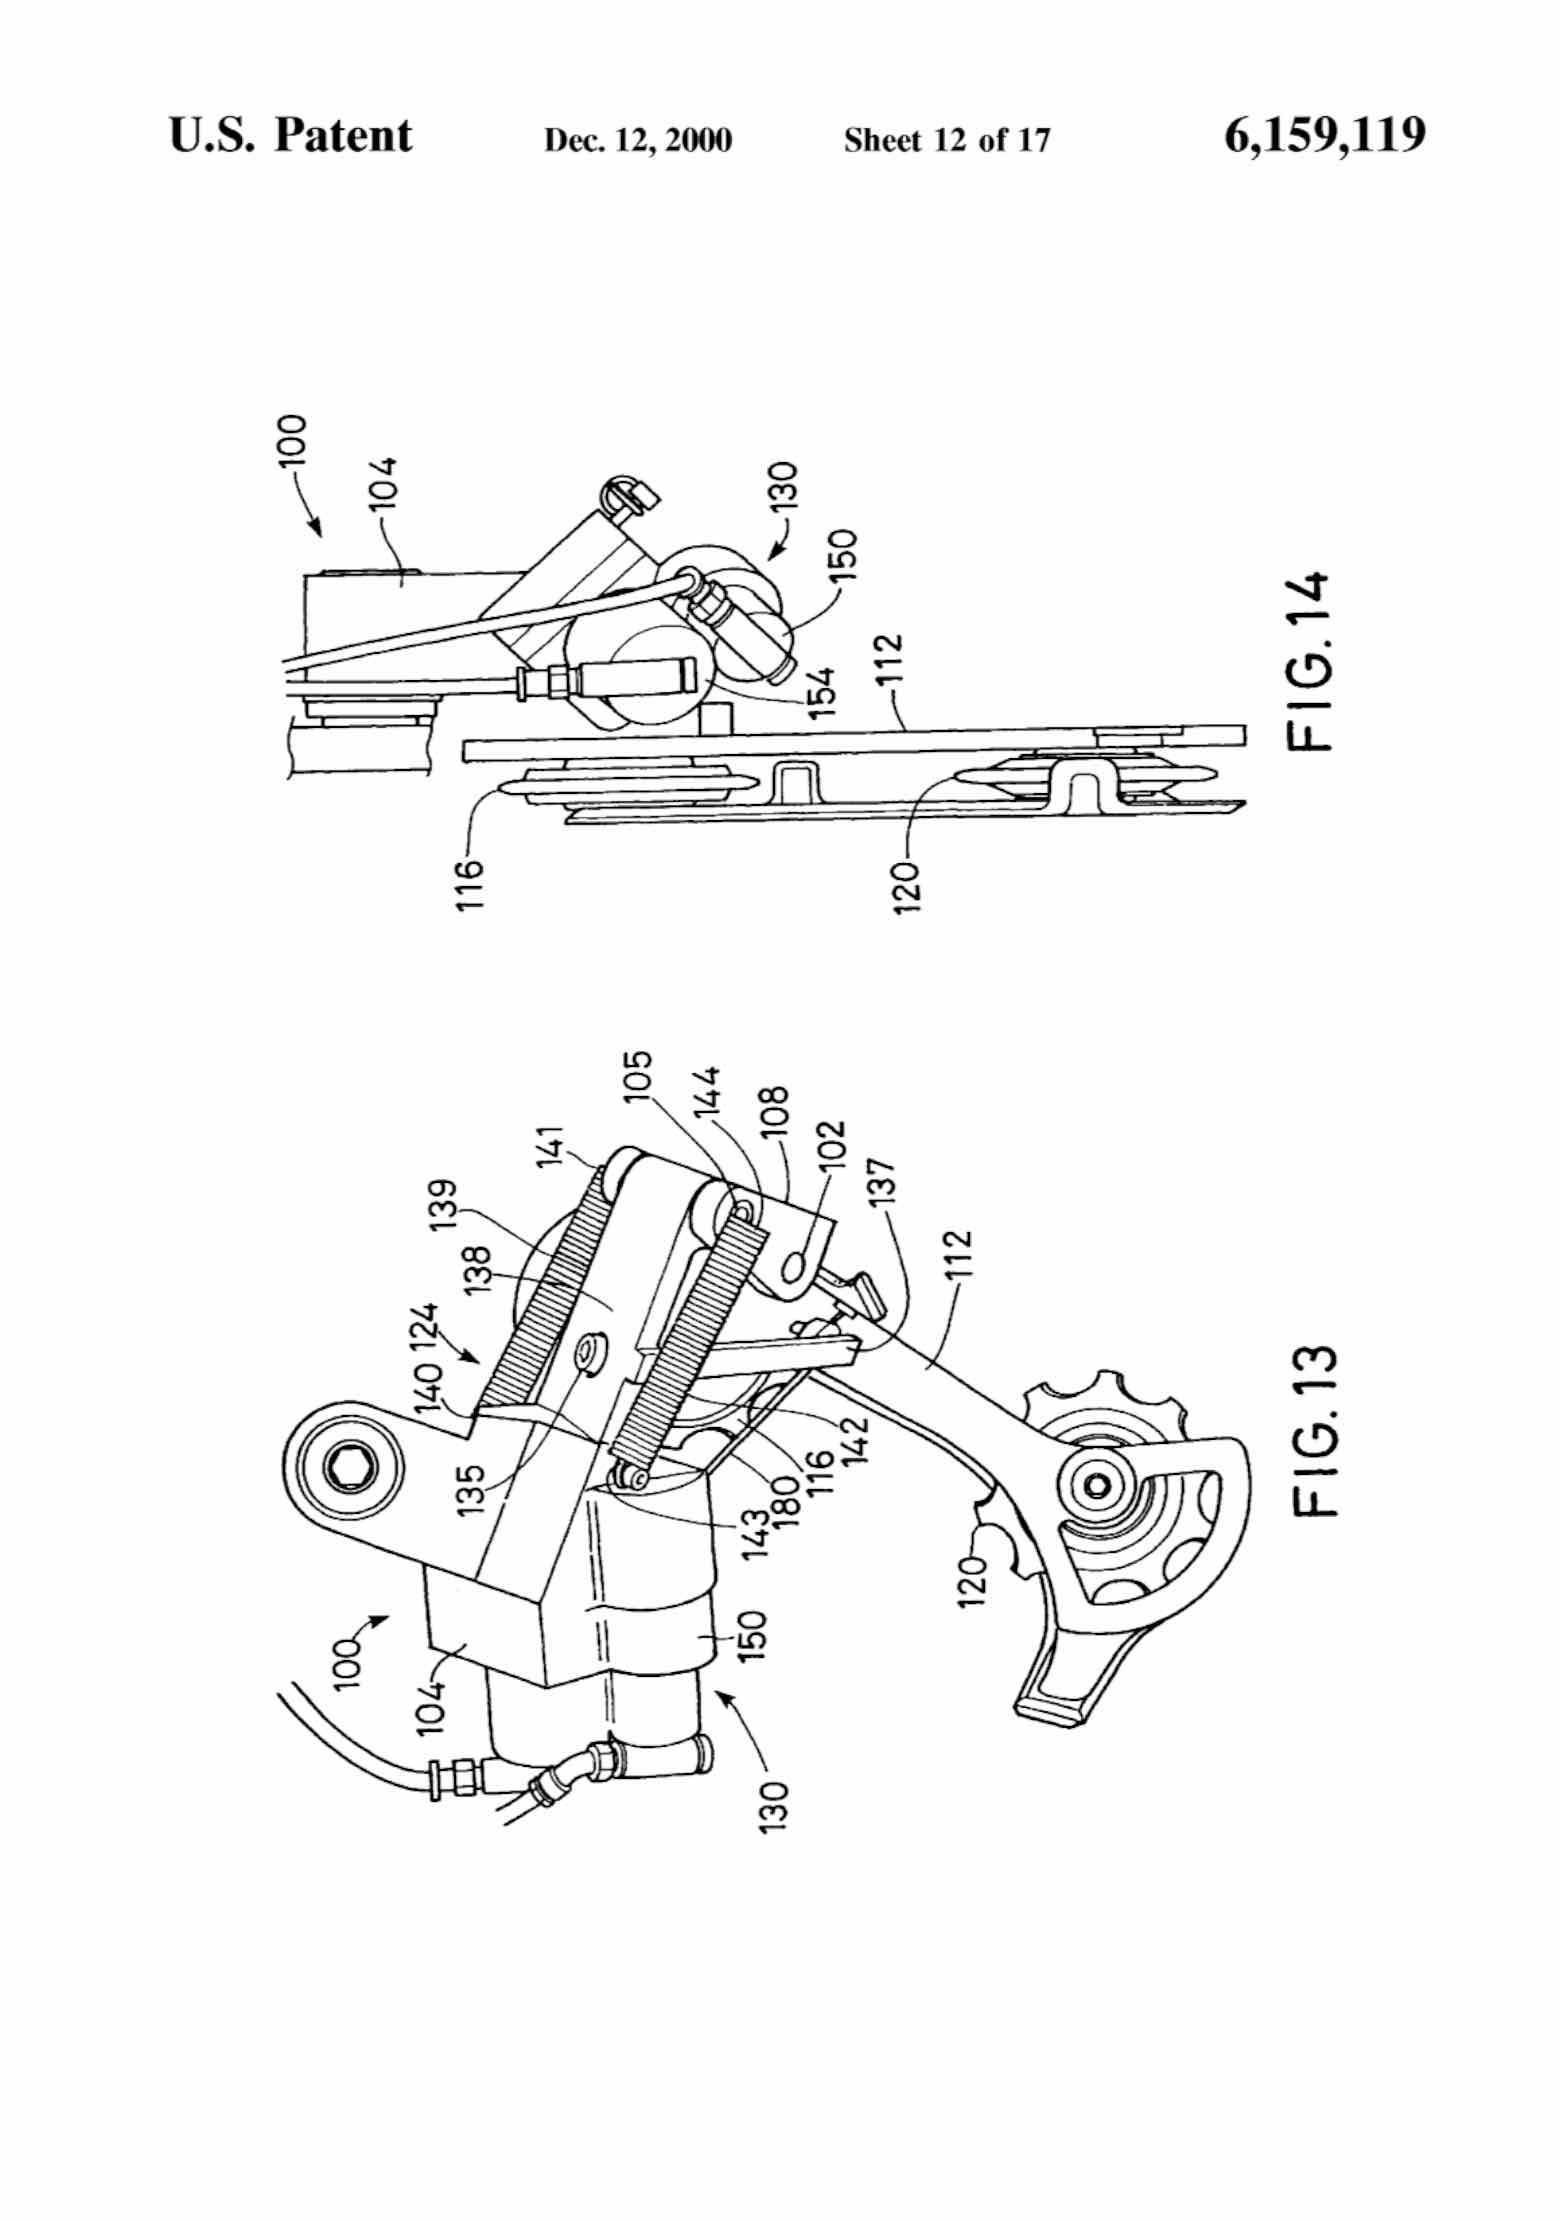 US Patent 6,159,119 - Shimano AirLines scan 13 main image